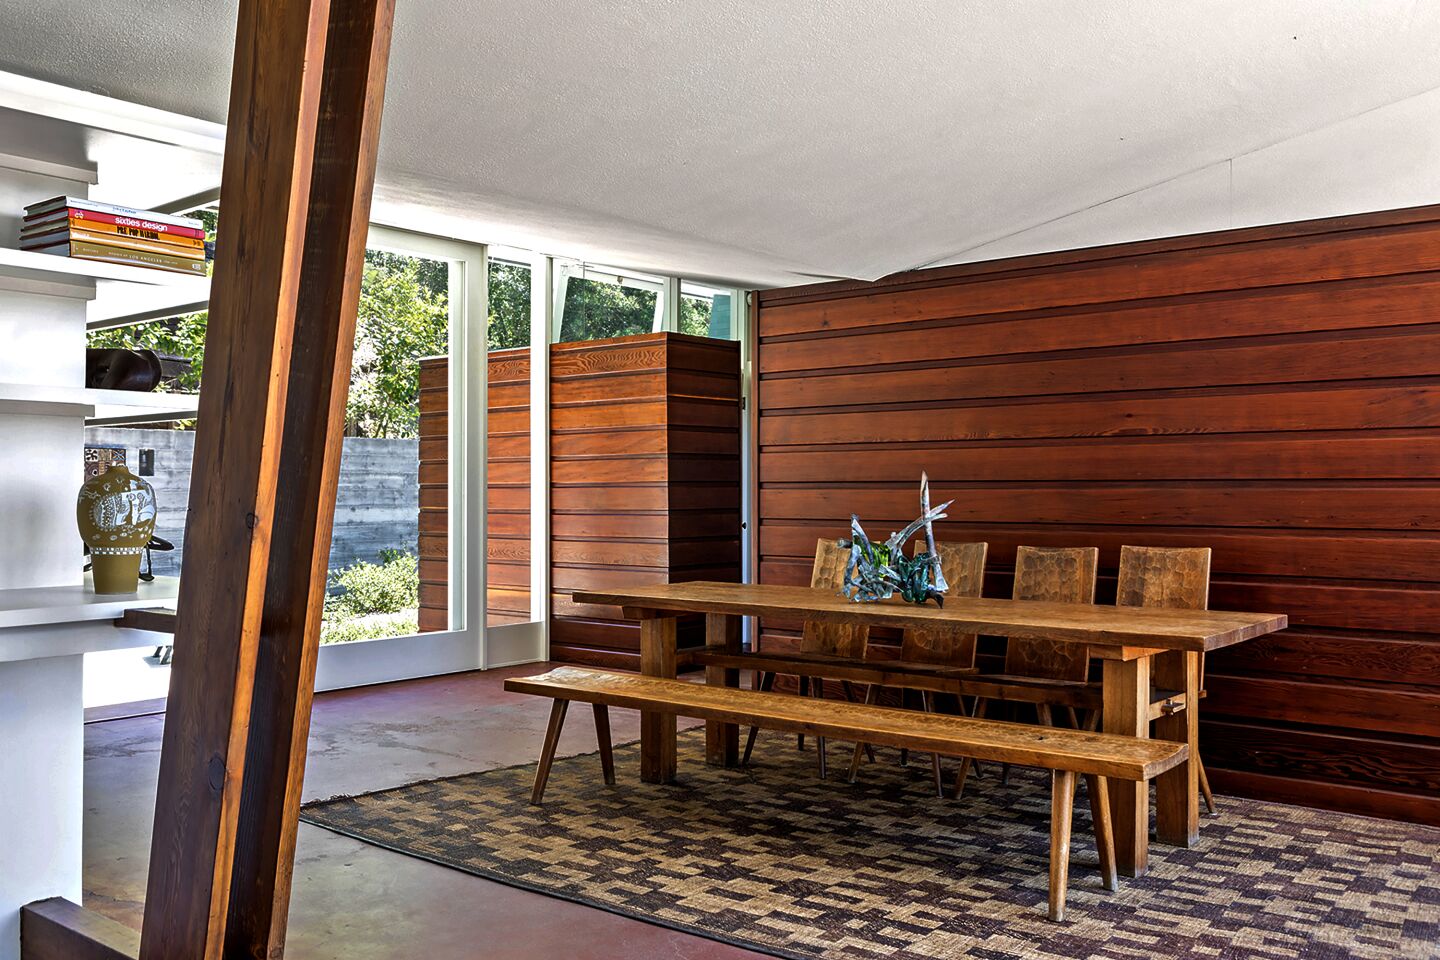 AFTER - DINING ROOM: This interior redwood wall was restored.